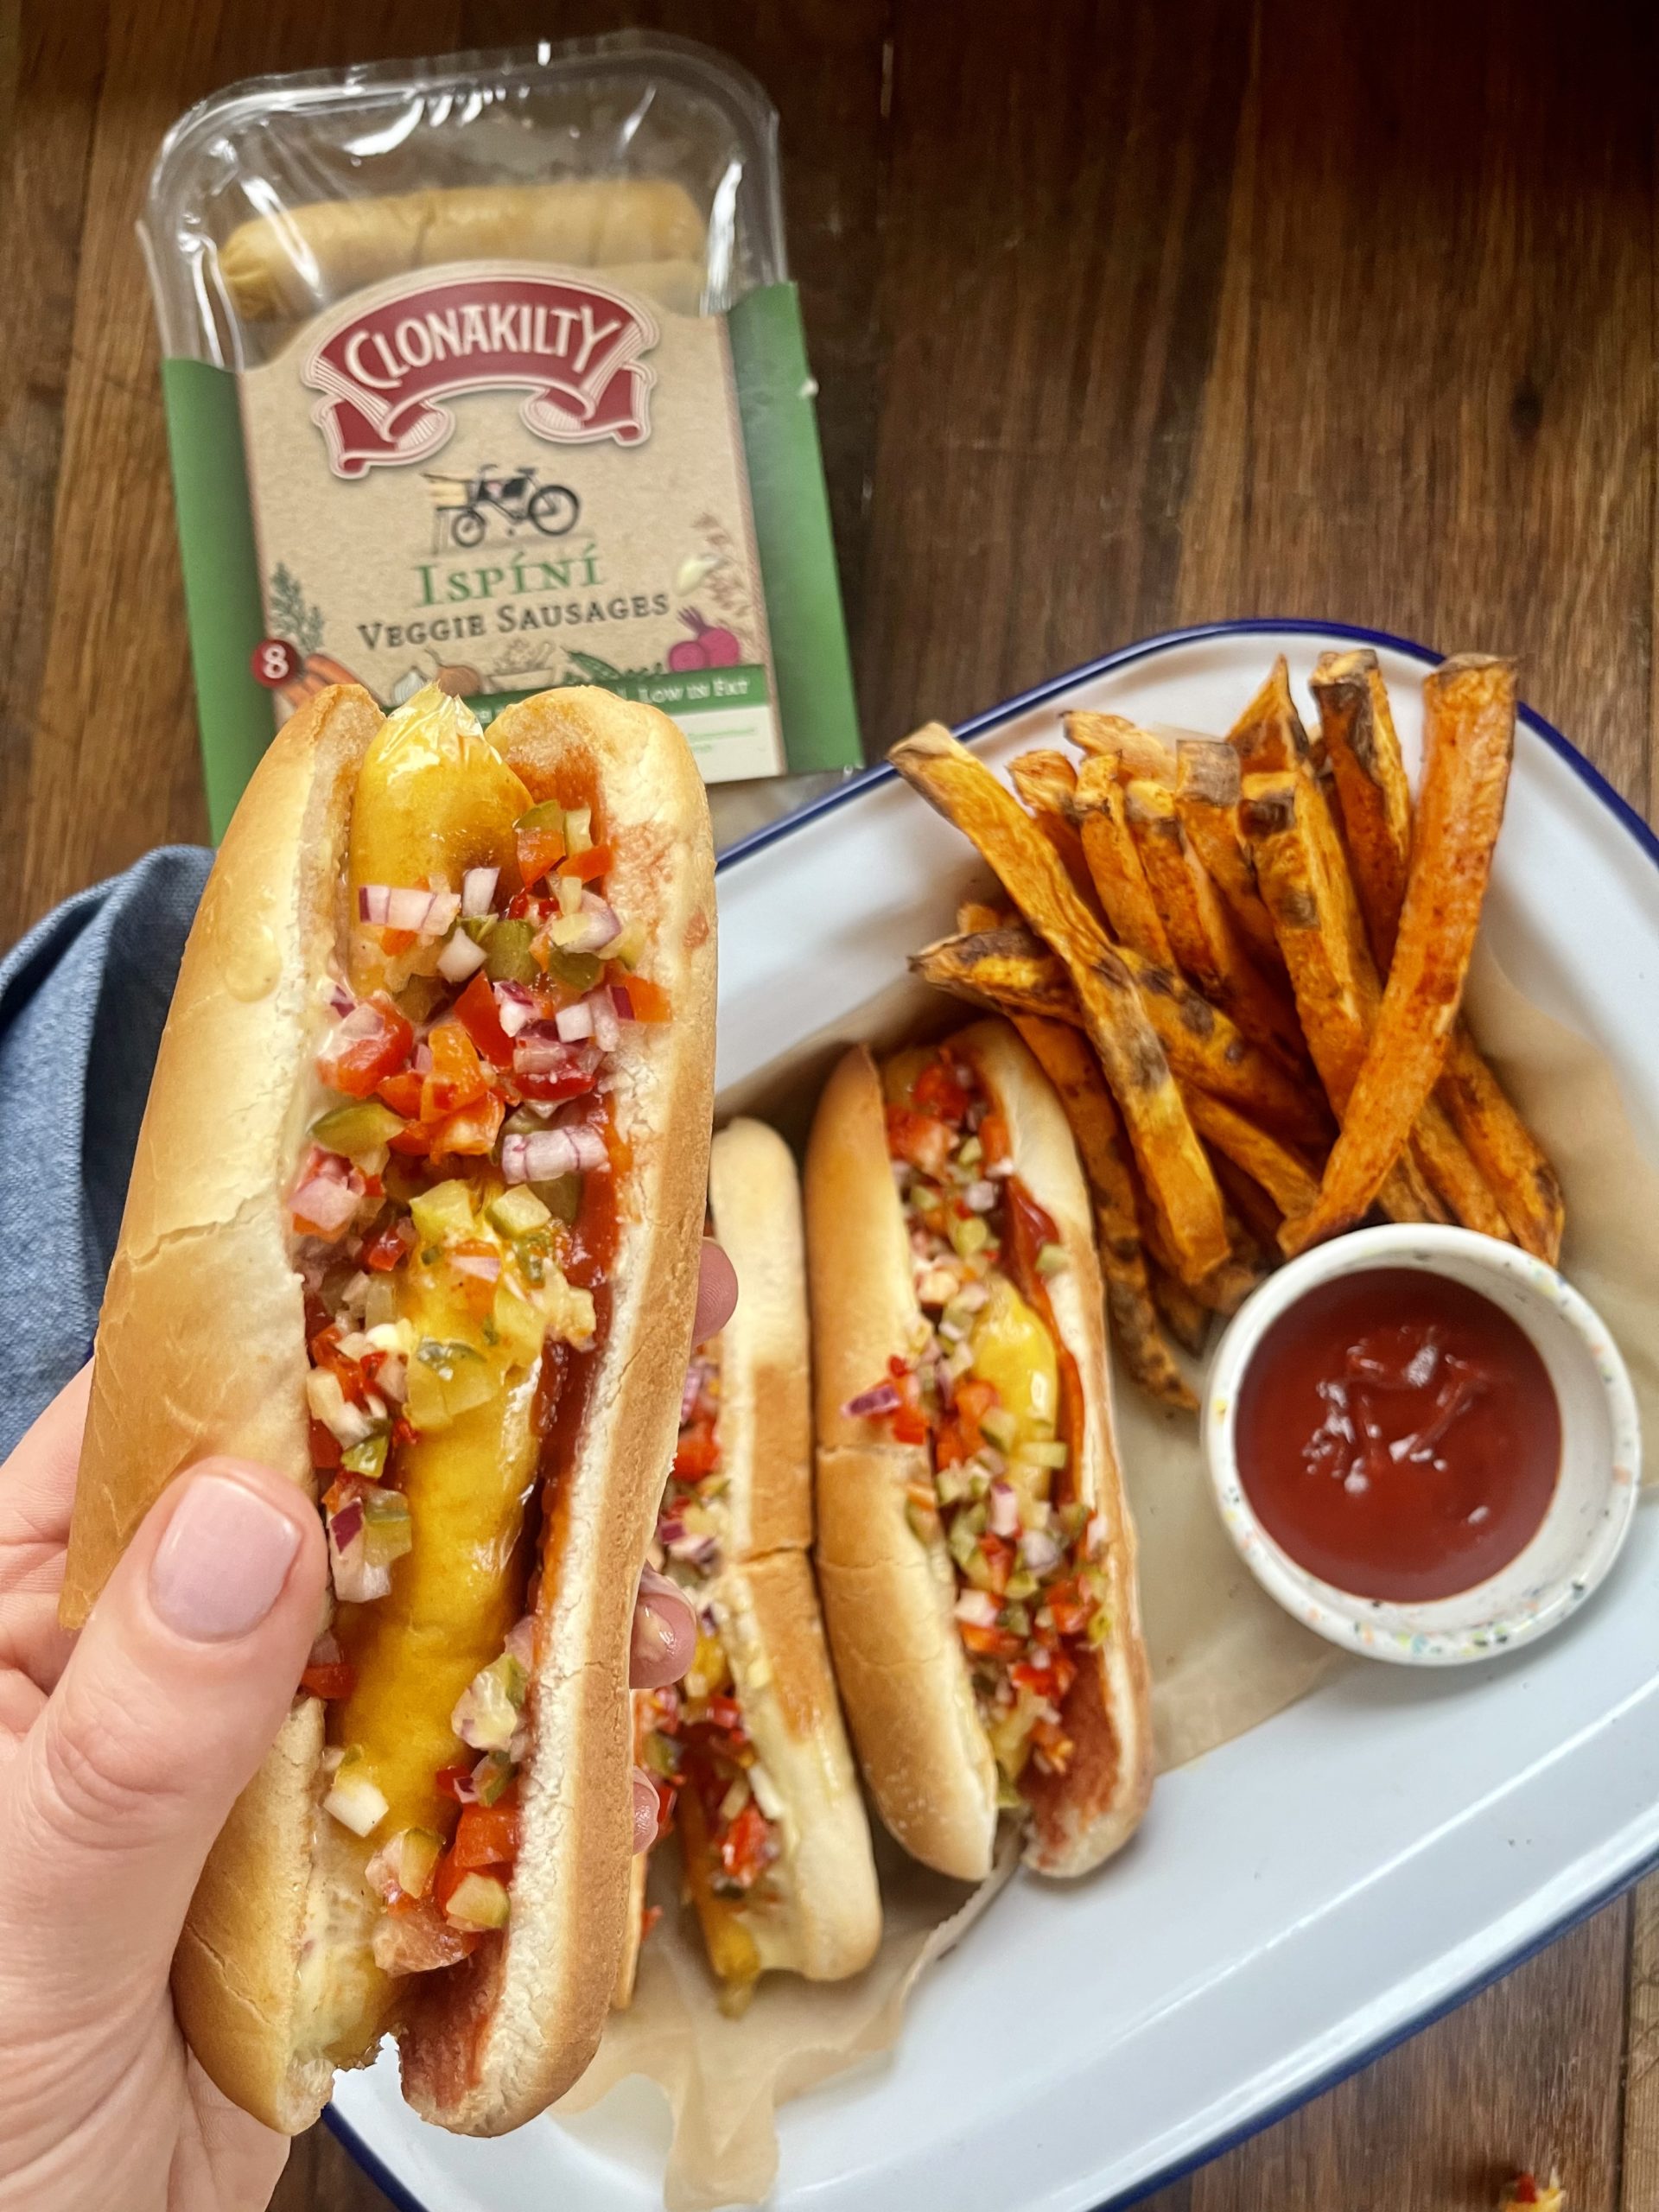 Fully Loaded Veggie Hot Dogs with Sweet Potato Fries